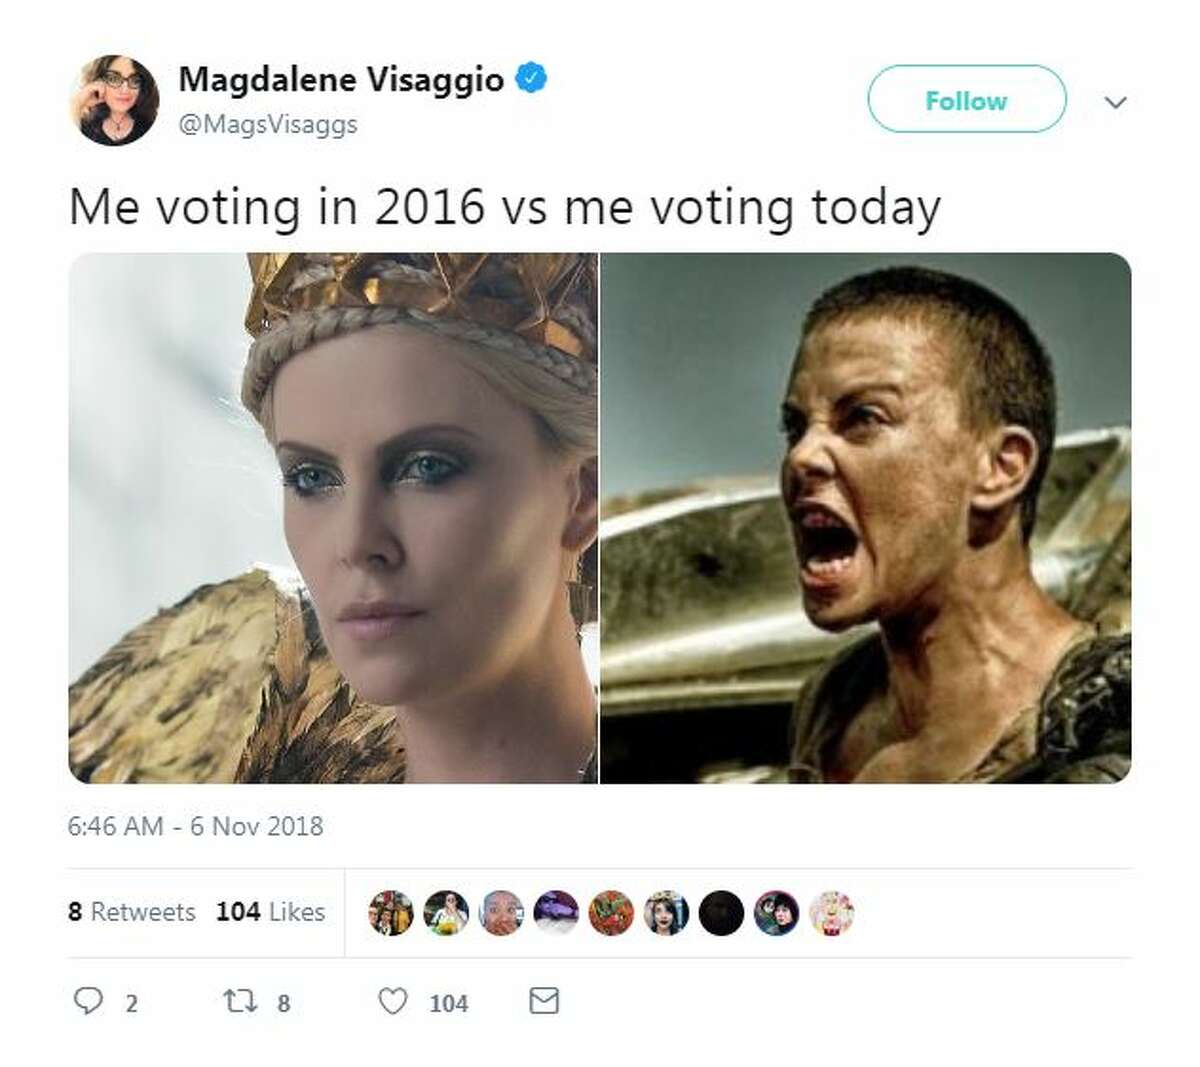 @MagsVisaggs: "Me voting in 2016 vs me voting today"